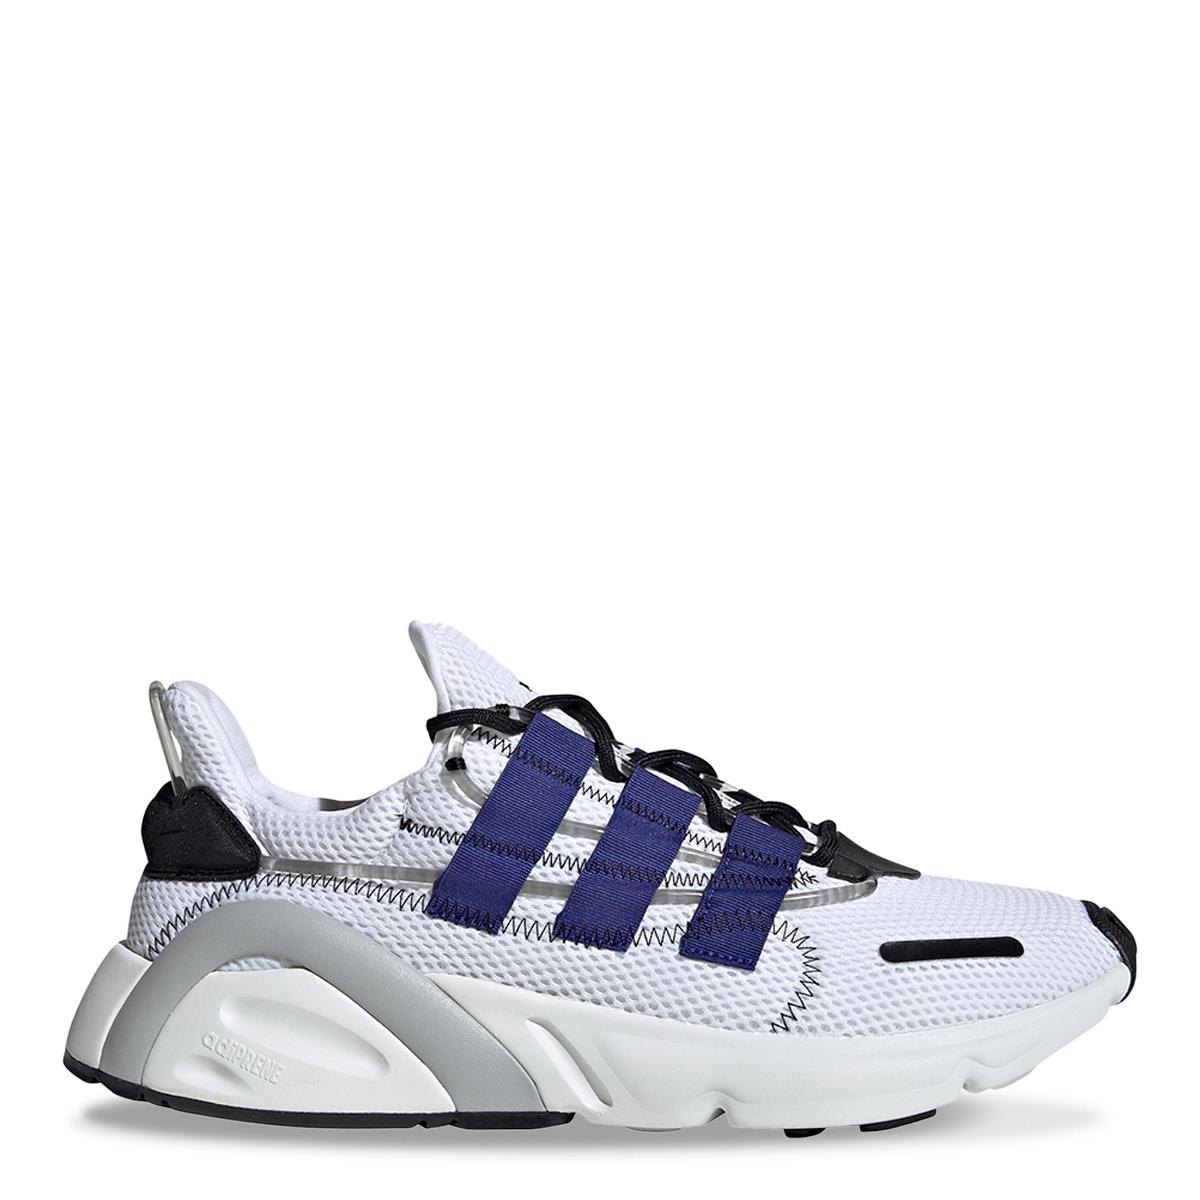 adidas Originals Rubber White And Blue Lx Adiprene Sneakers for Men - Lyst